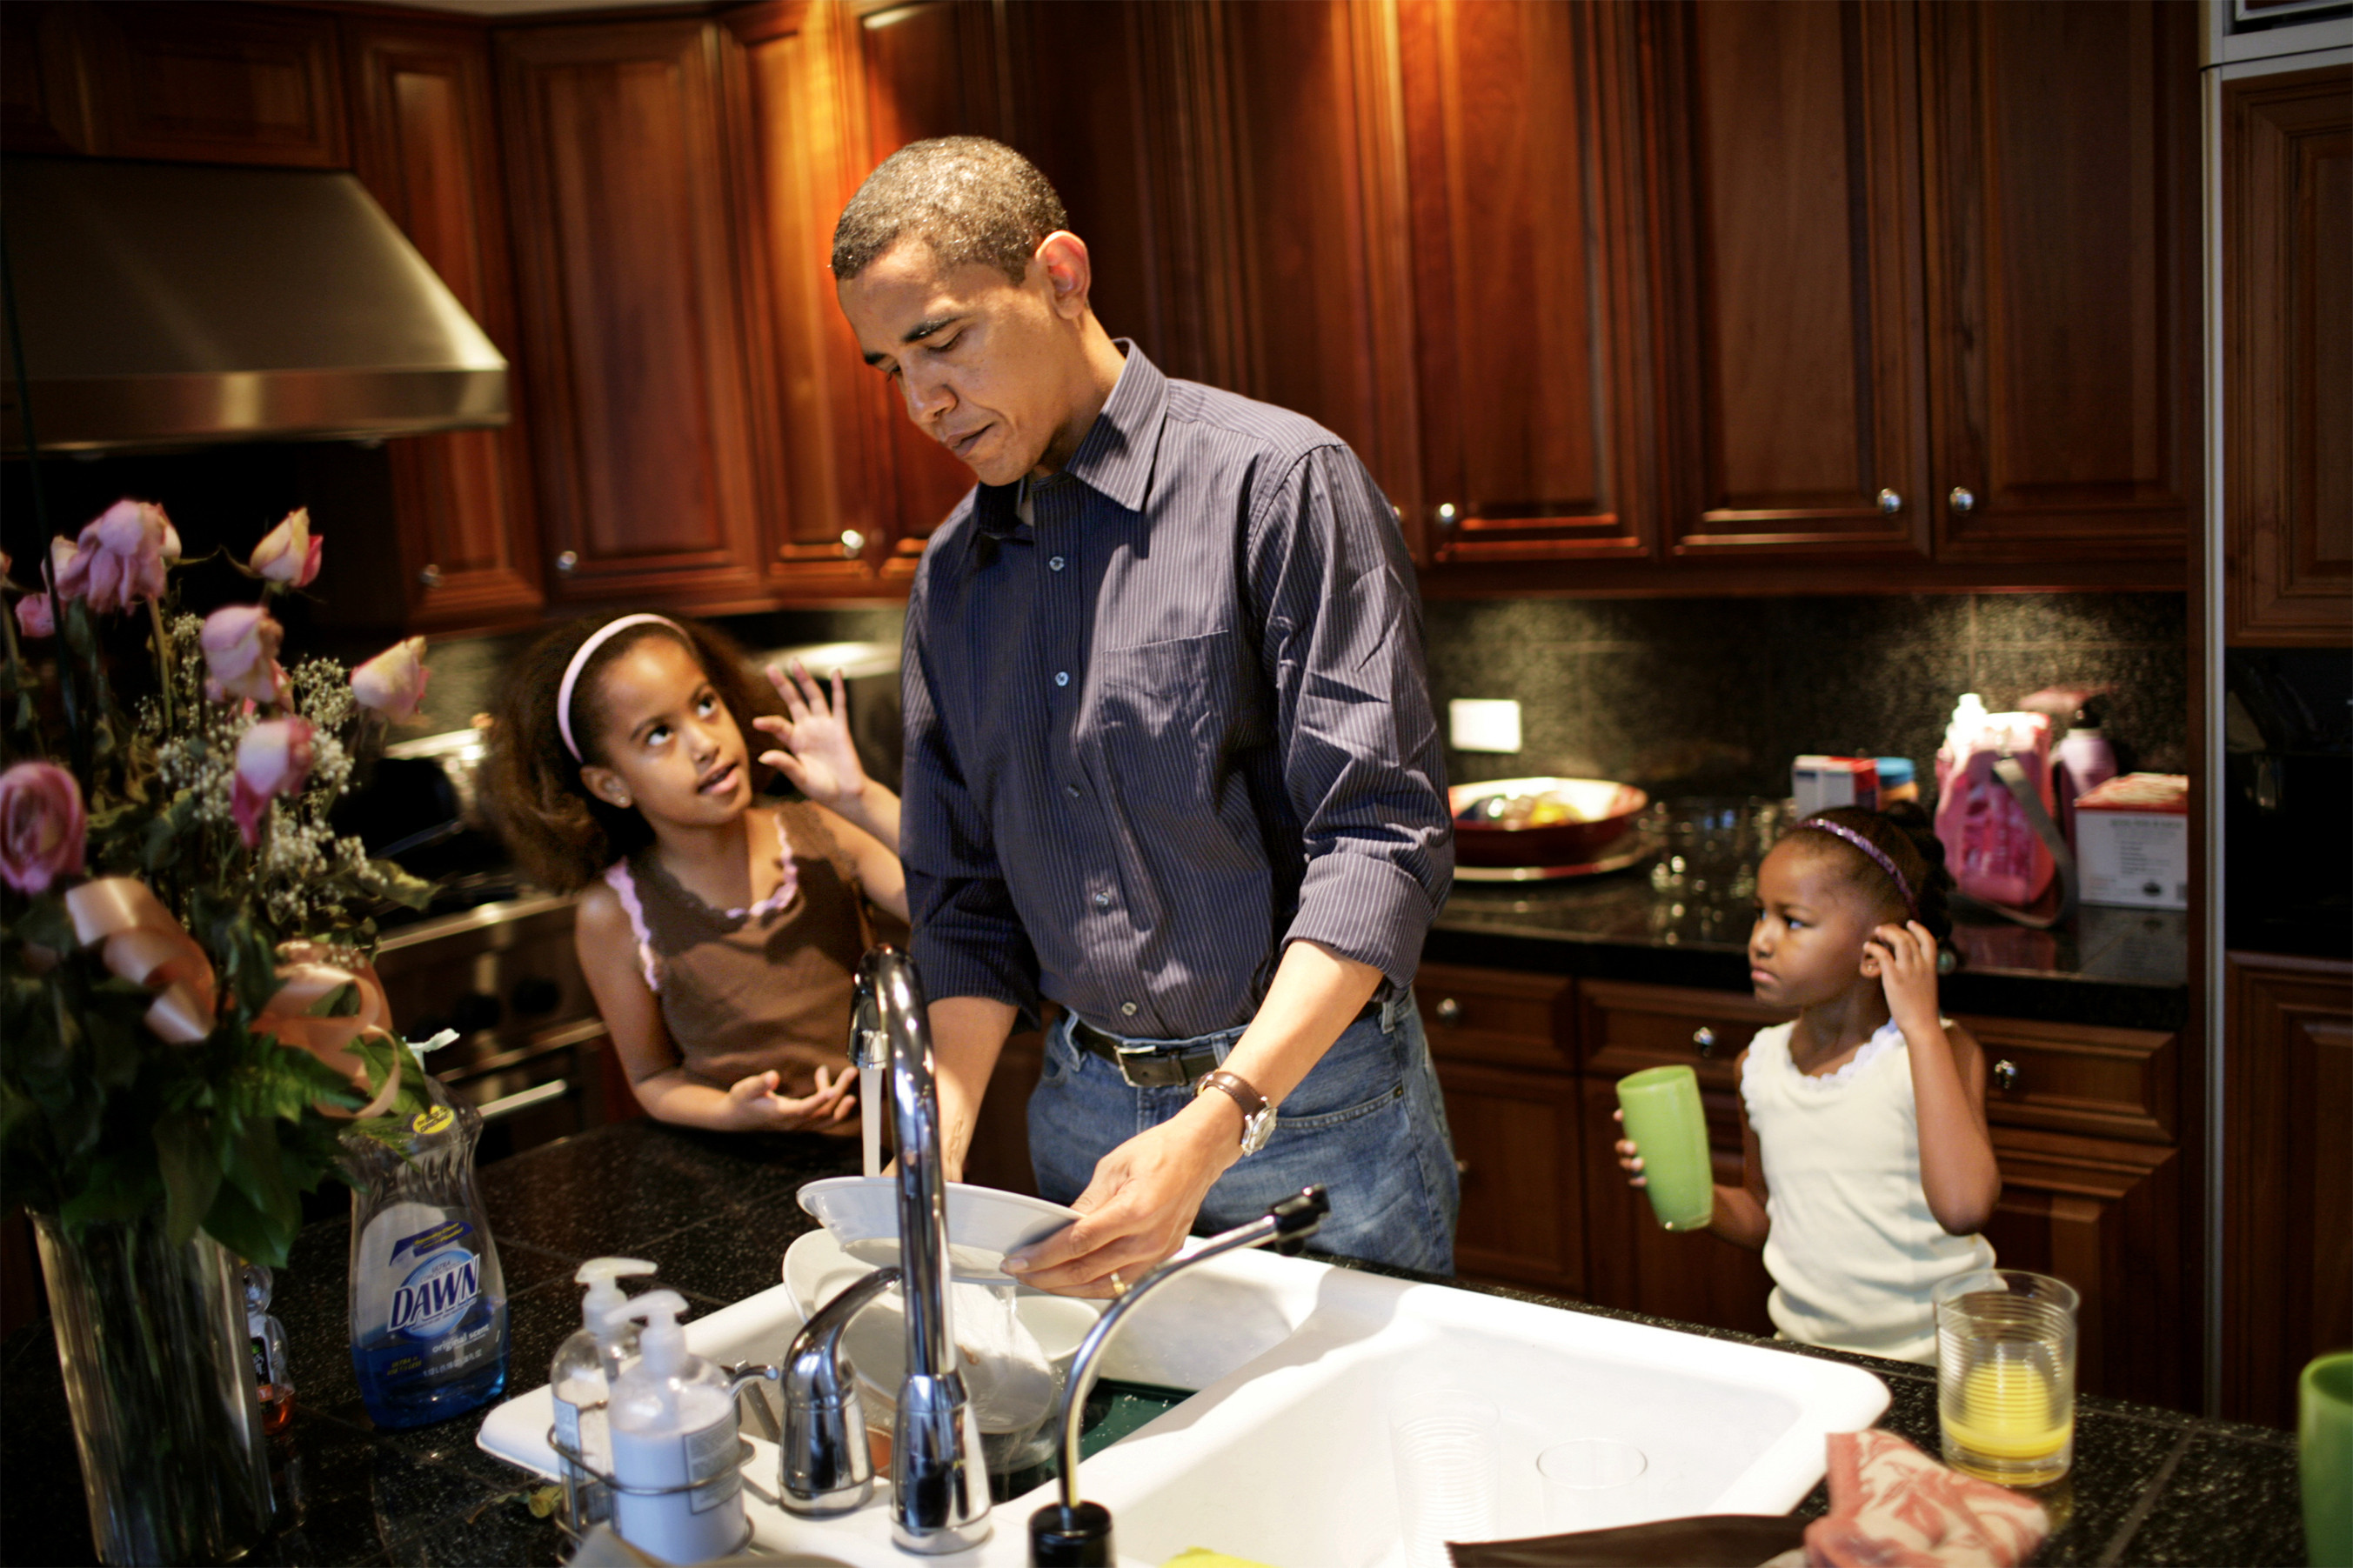 Obama Reveals How The Presidency Has Made His Family Life More 'Normal' Than Ever ...2705 x 1803